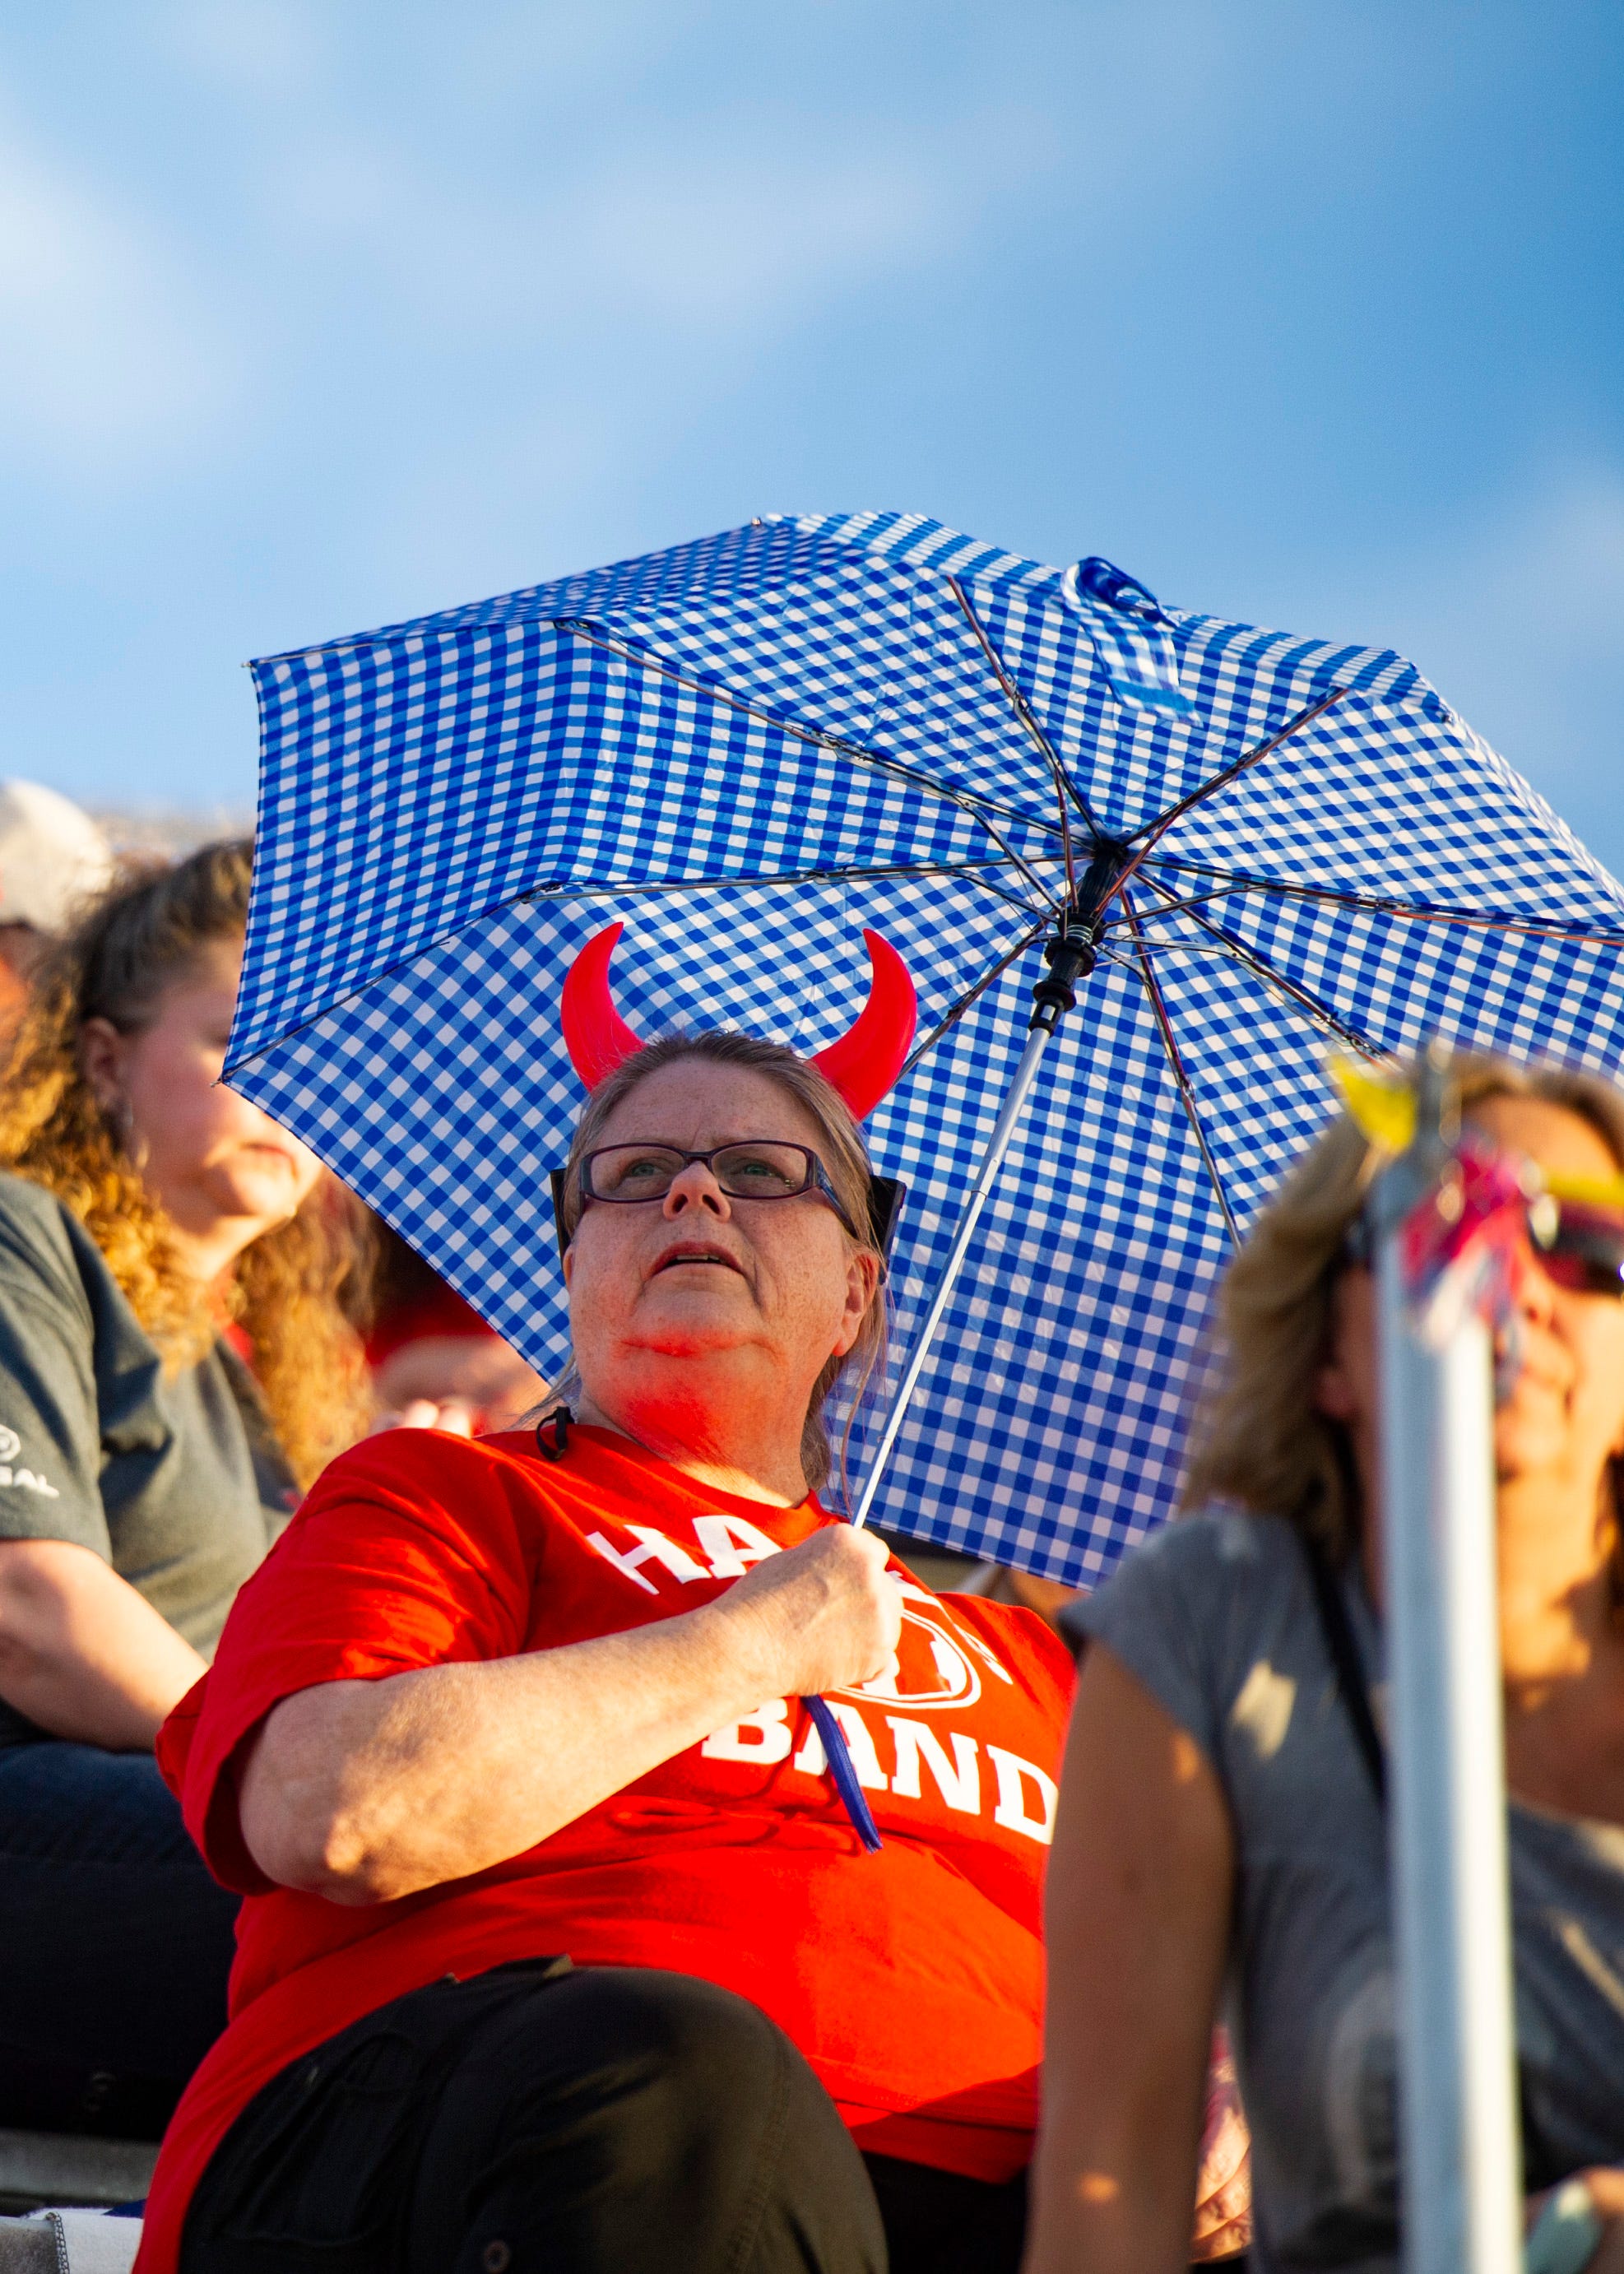 A Halls fan sits in the stands before the Halls and Central high school football game on Friday, October 4, 2019 at Halls High School.